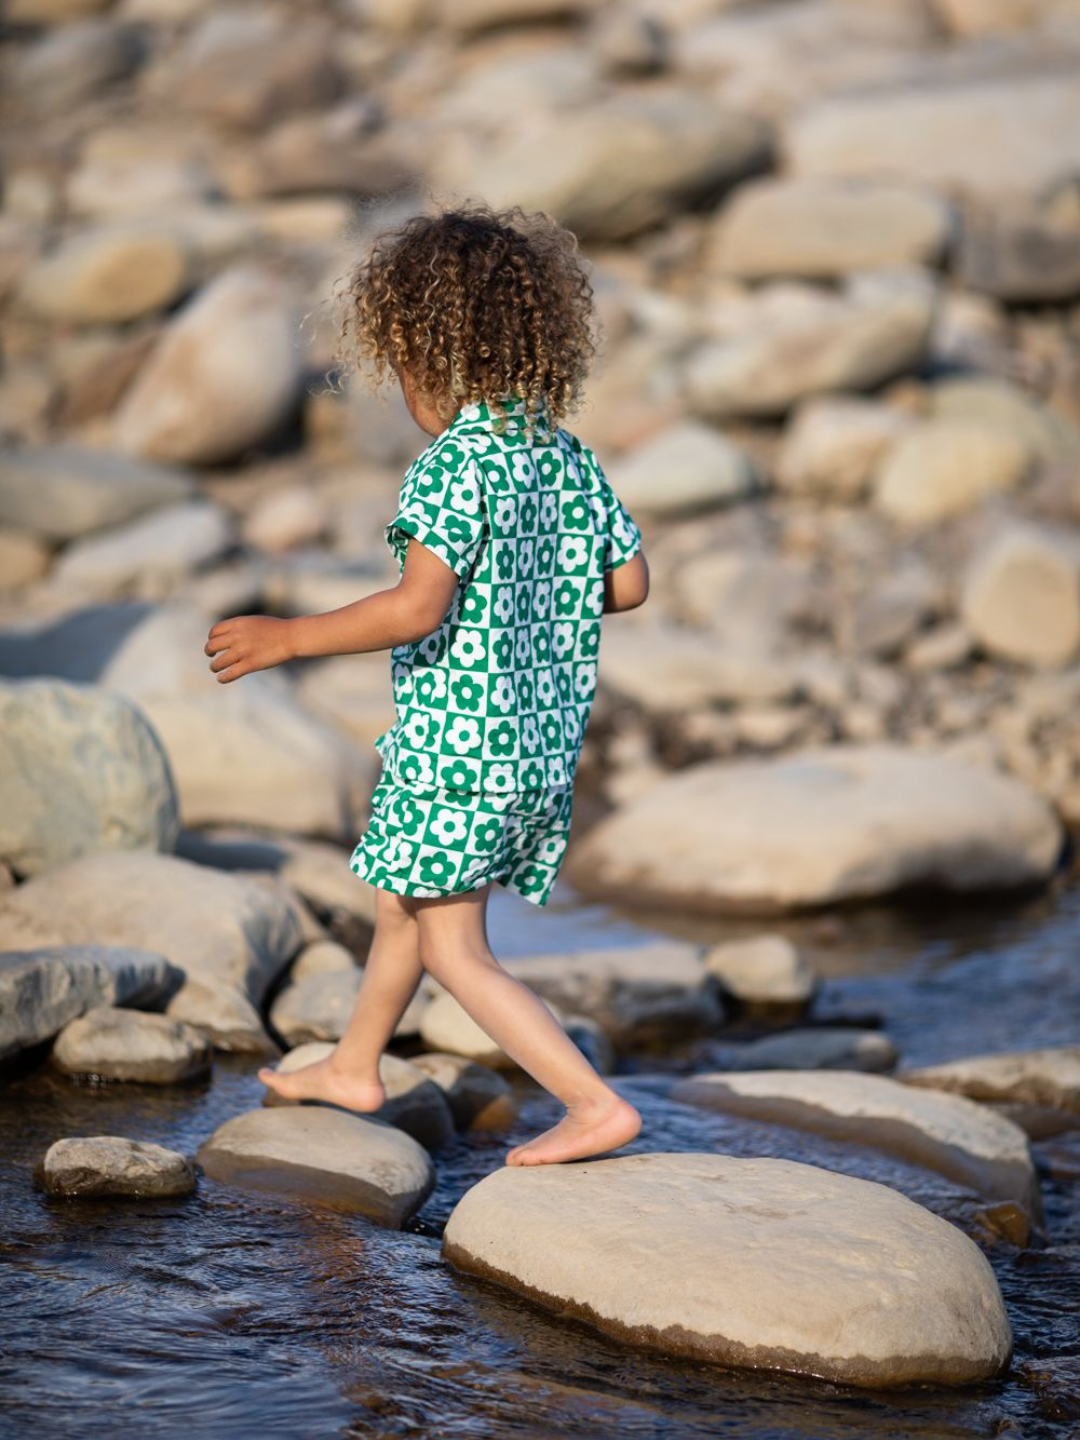 Pine | Child walking over stepping stones wearing a kids' short set printed in a checkerboard of green and white flowers